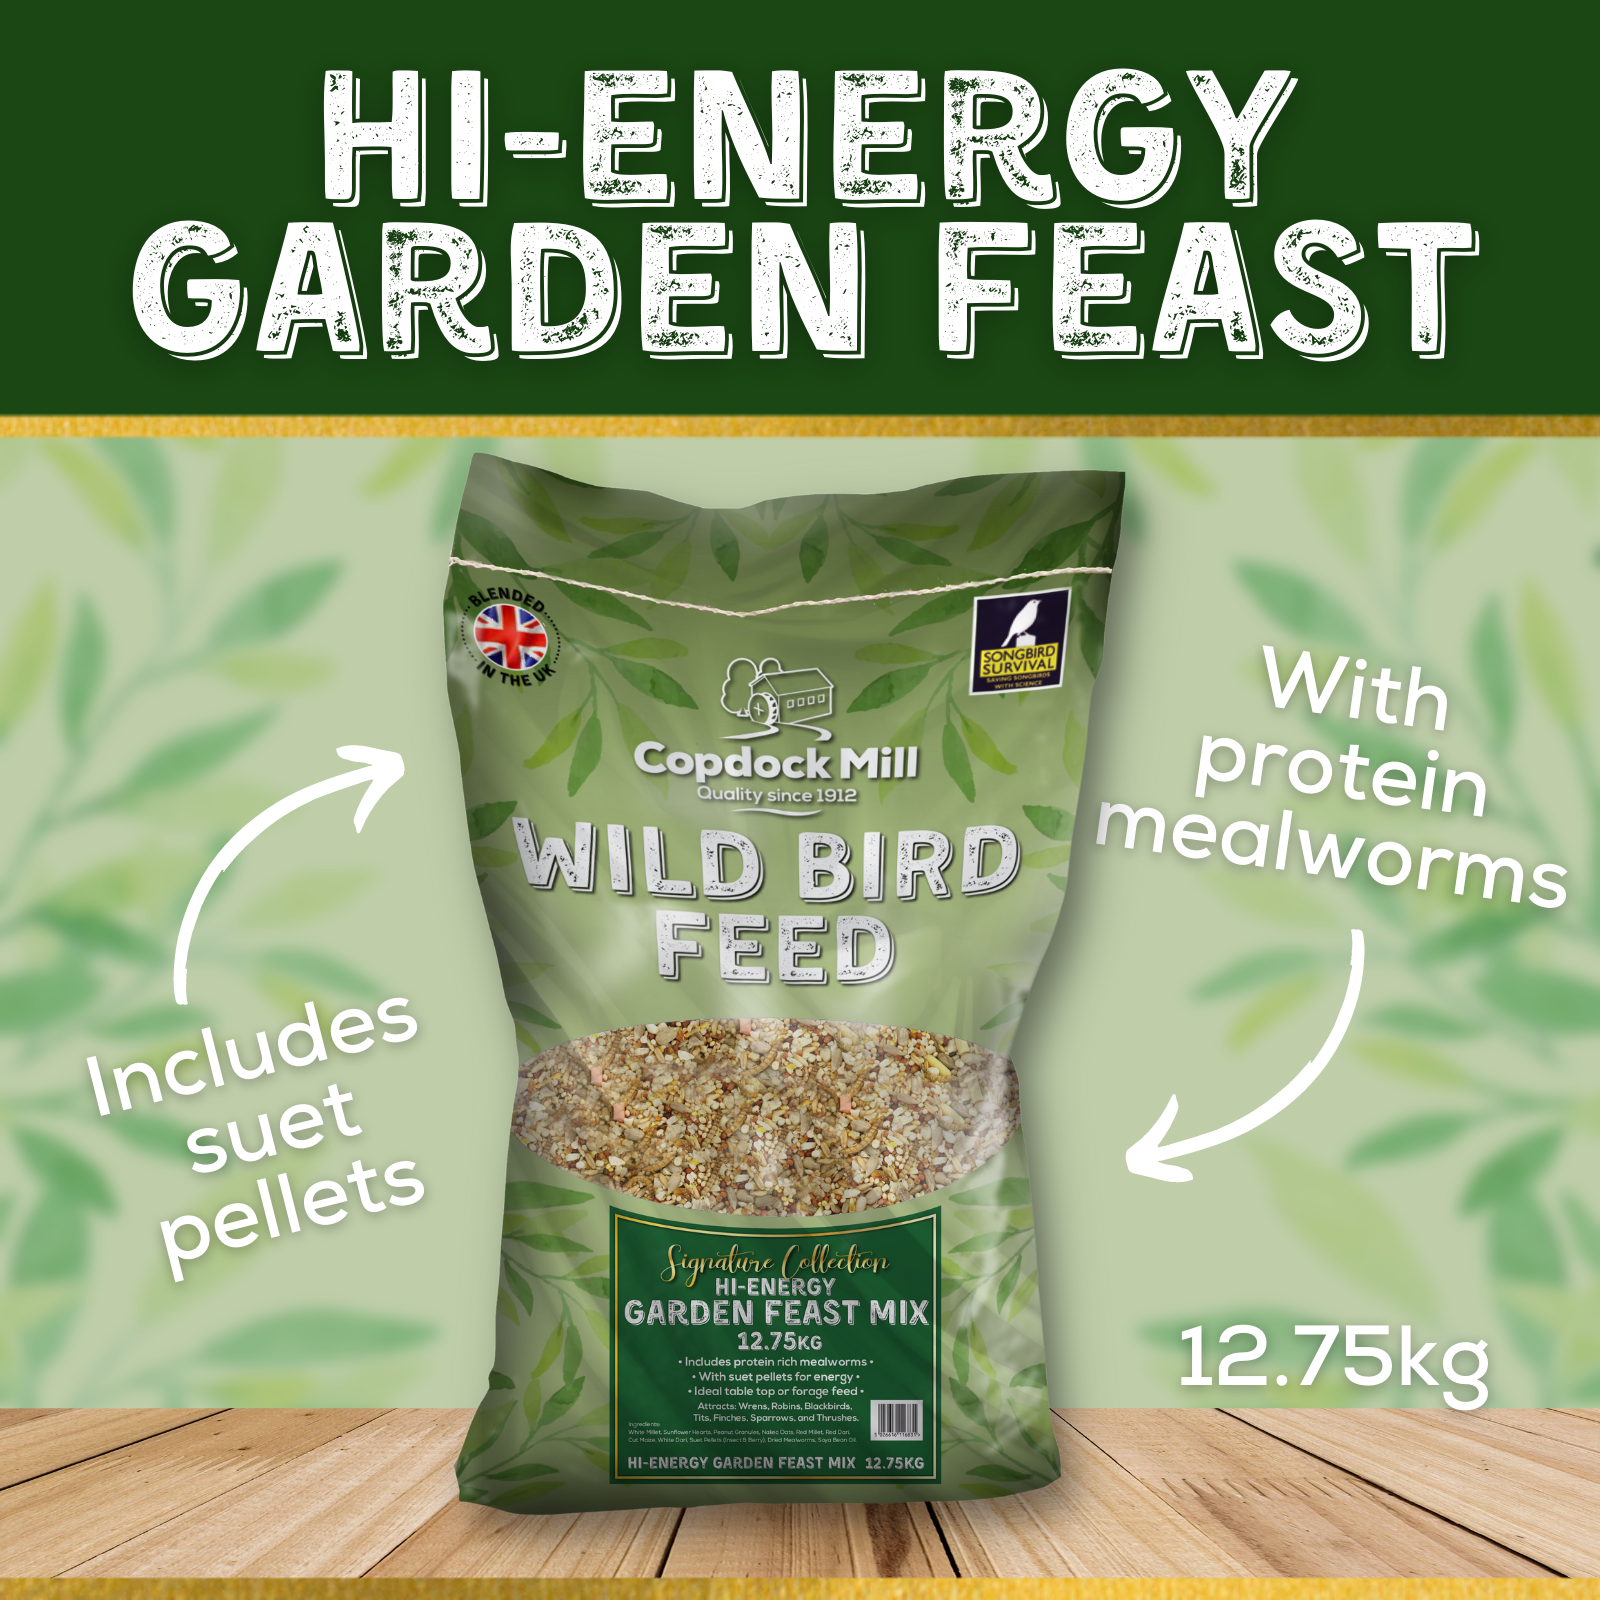 Hi-Energy Garden Feast: includes suet pellets, with protein mealworms